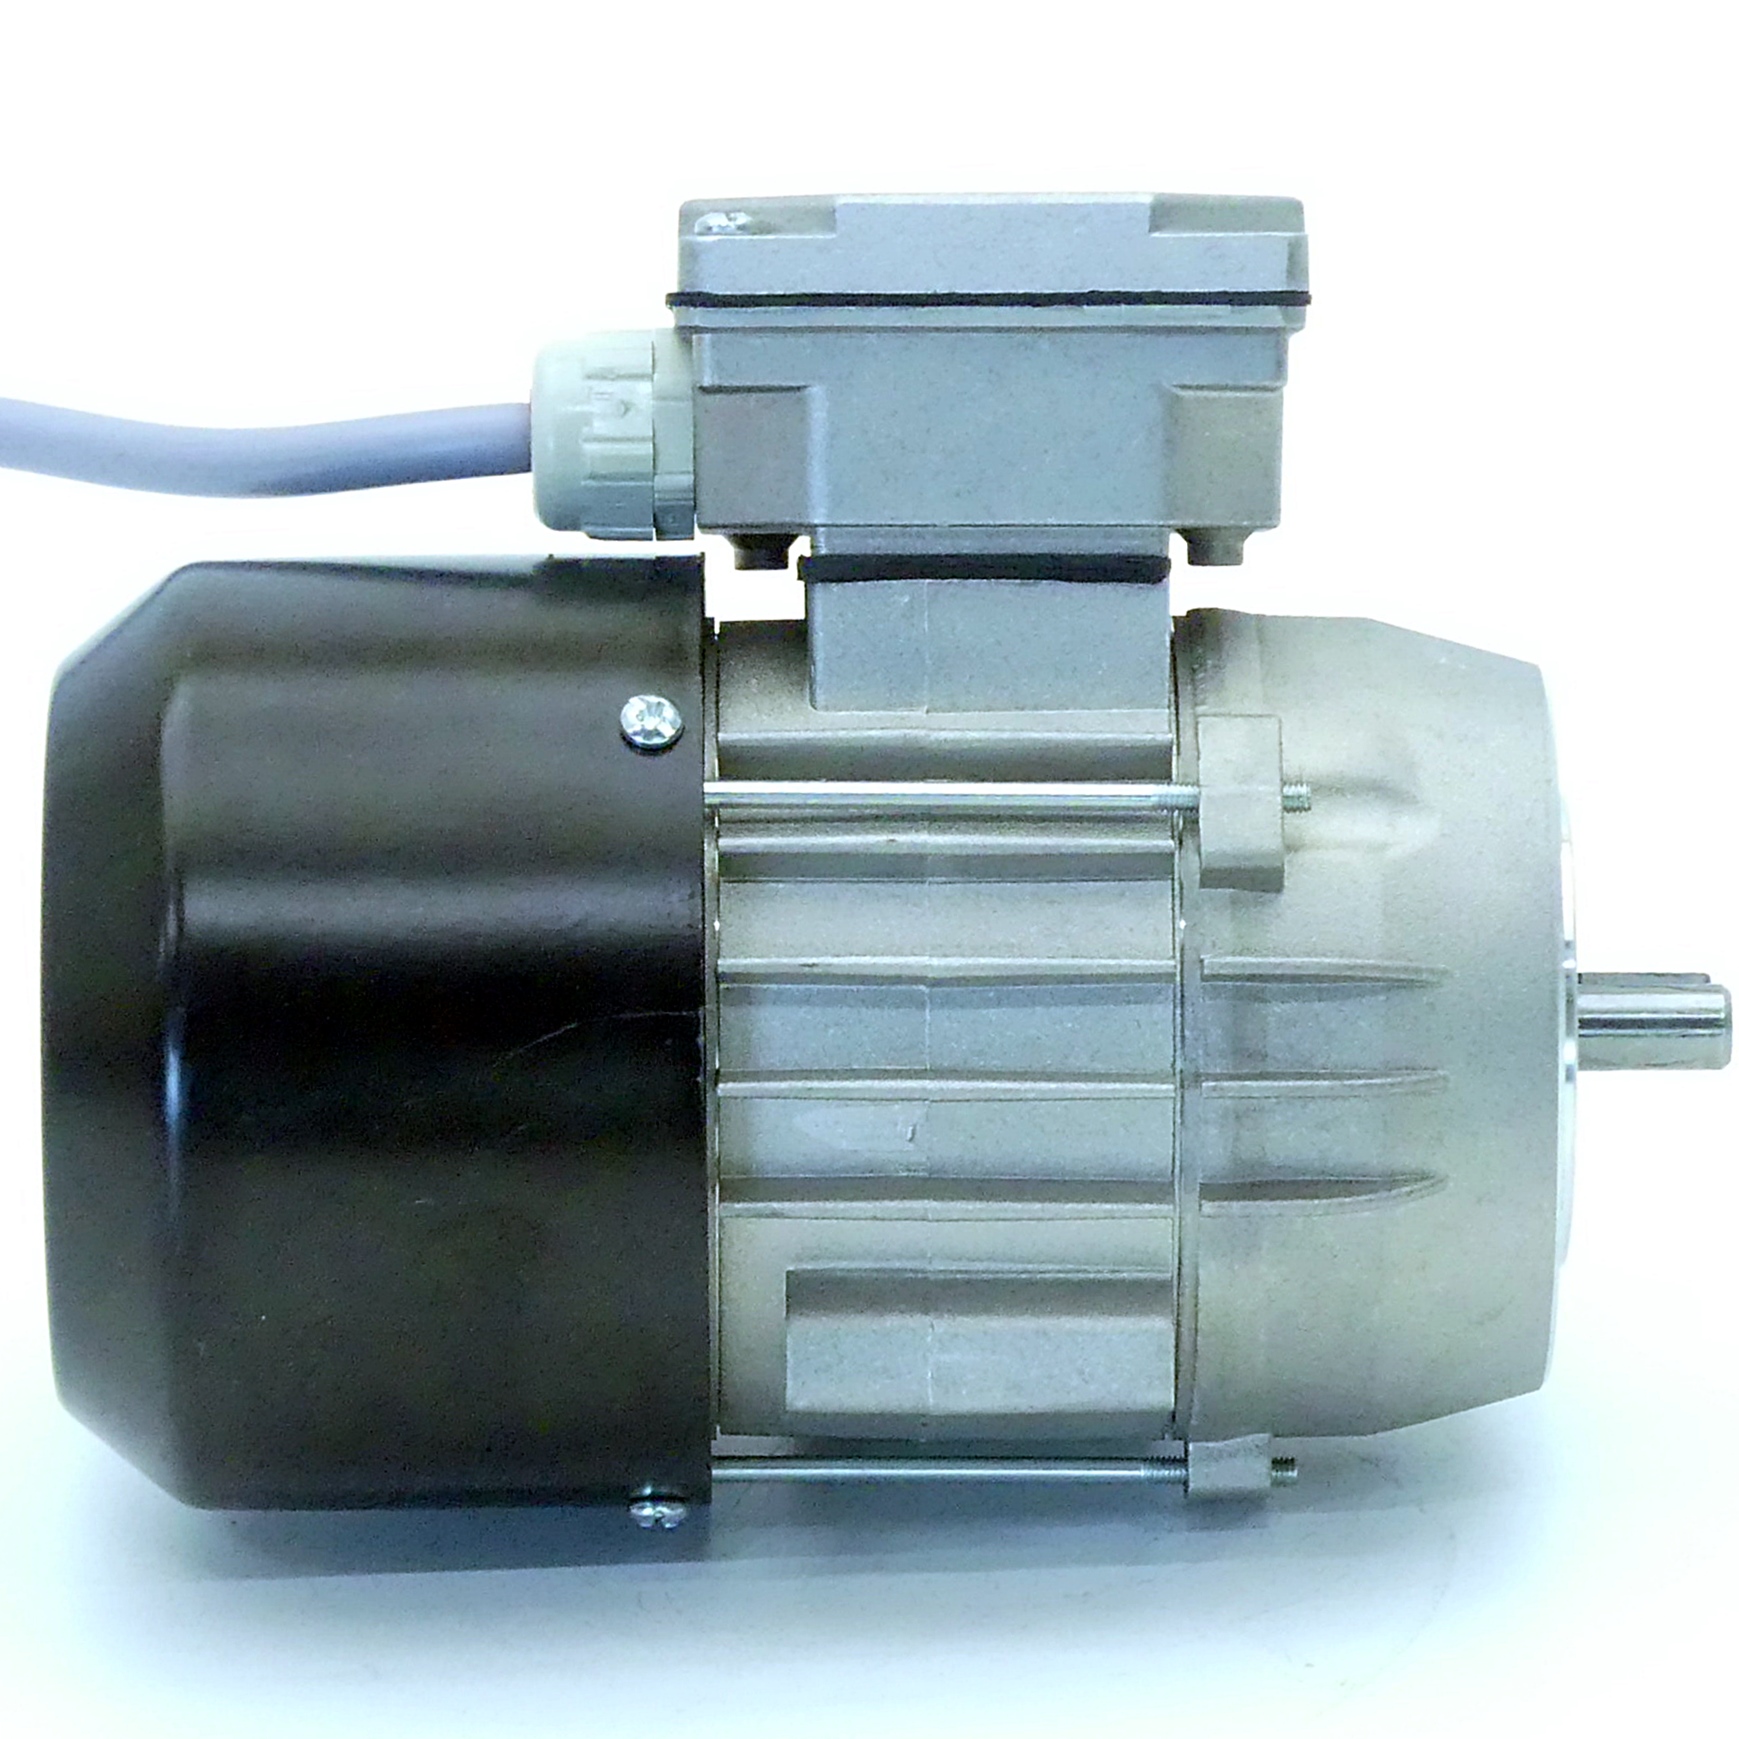 three-phase motor with cable 3 842 503 580 